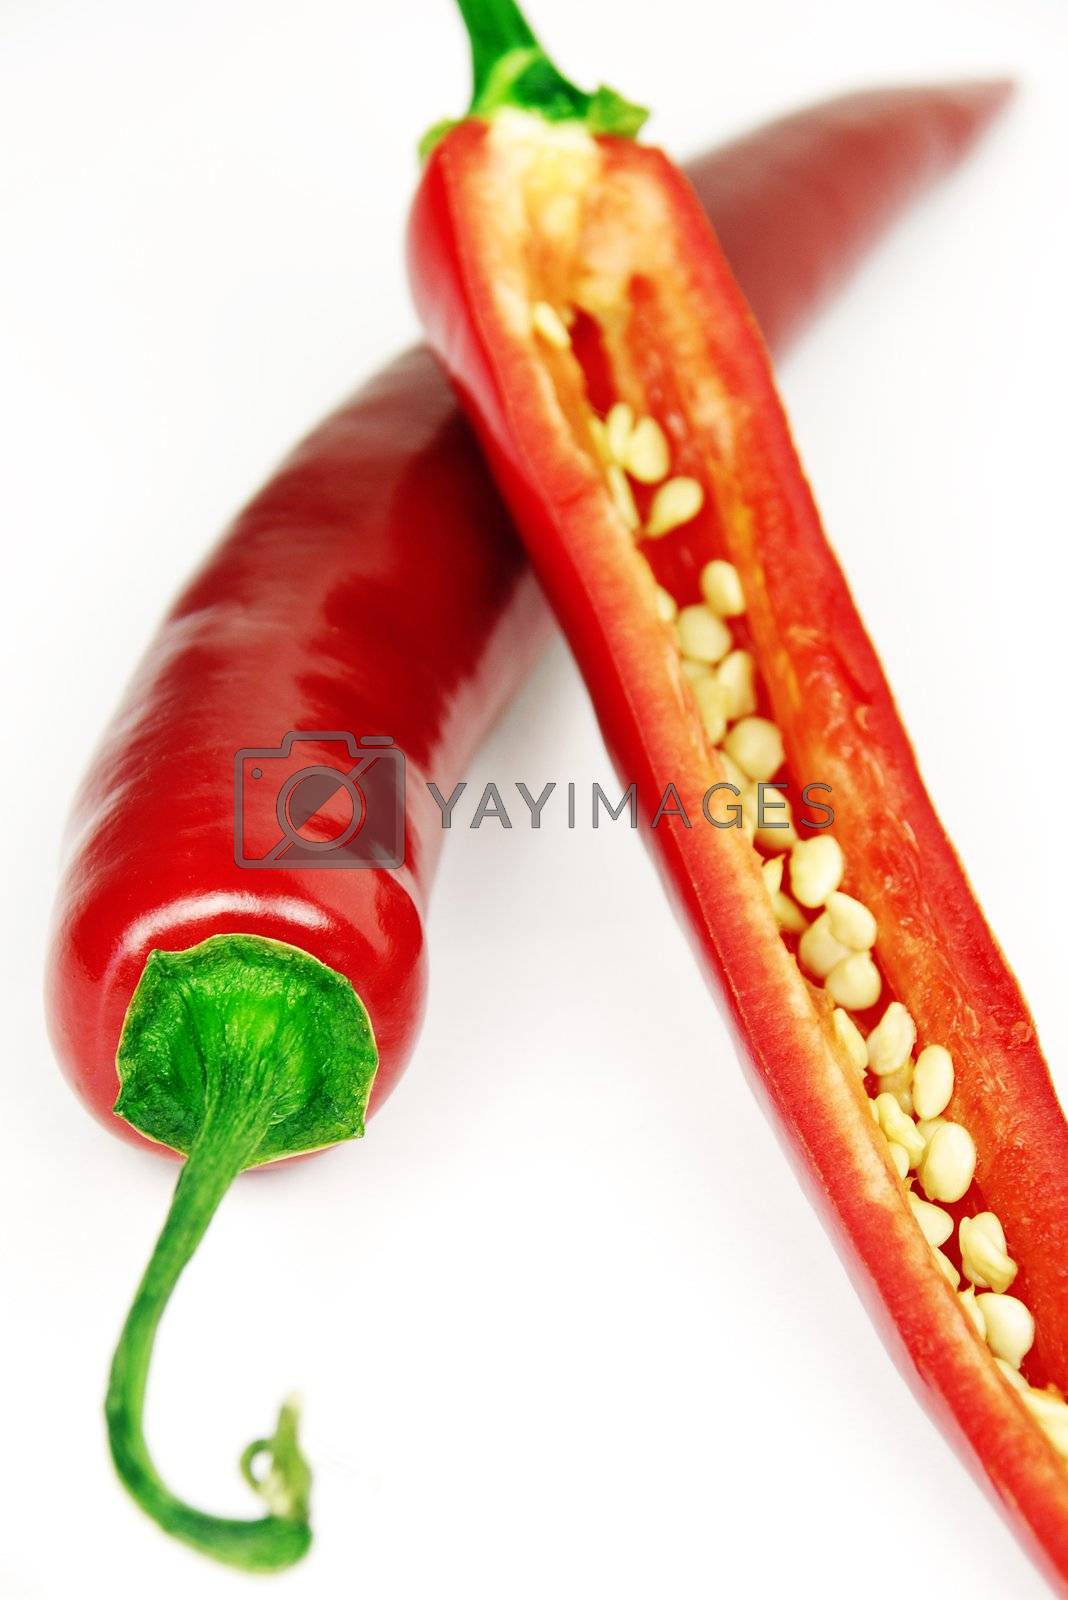 Royalty free image of Chillies and Seeds by massman